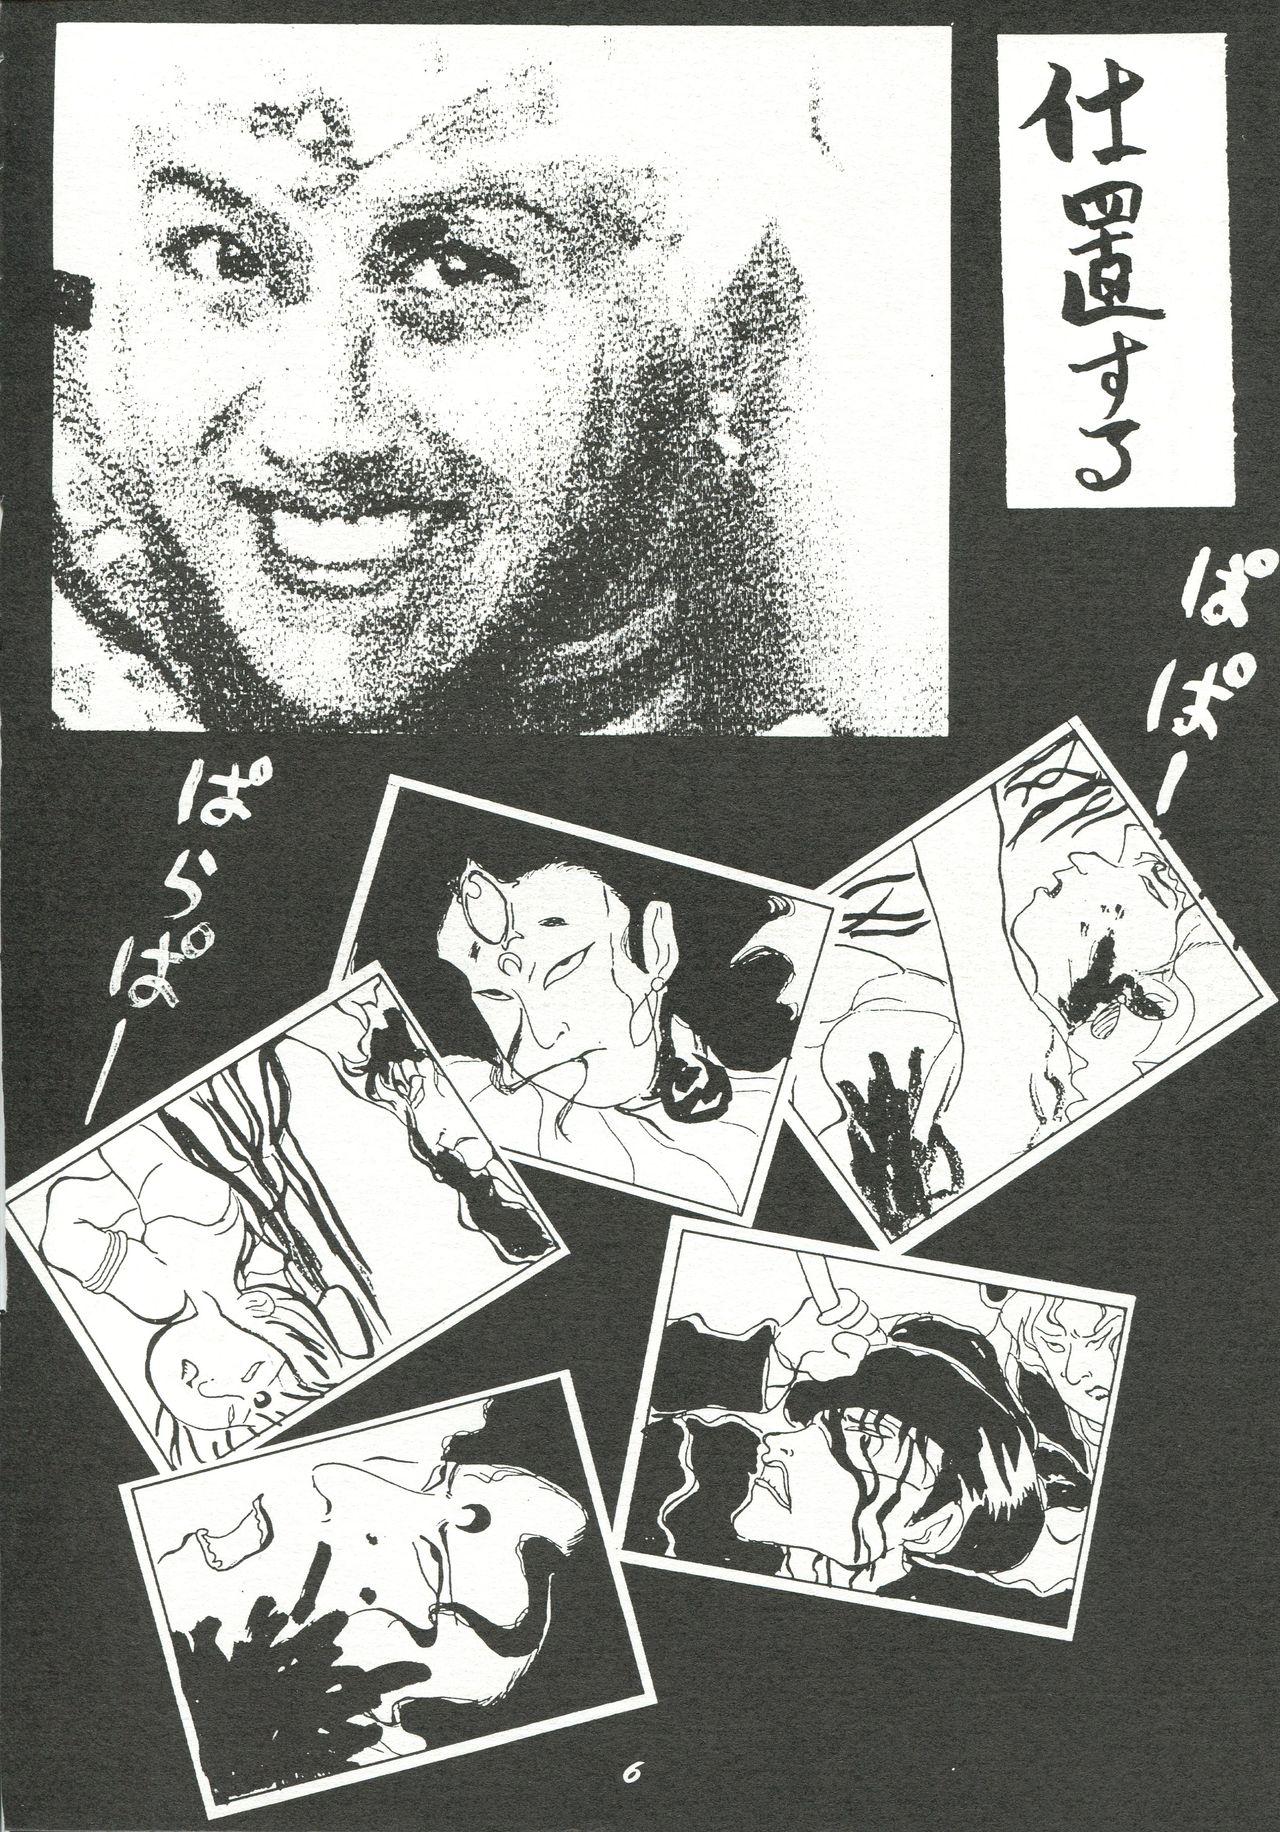 Hot Brunette Harenchi - Dirty pair Dirty pair flash Elf 17 Sesso - Page 5